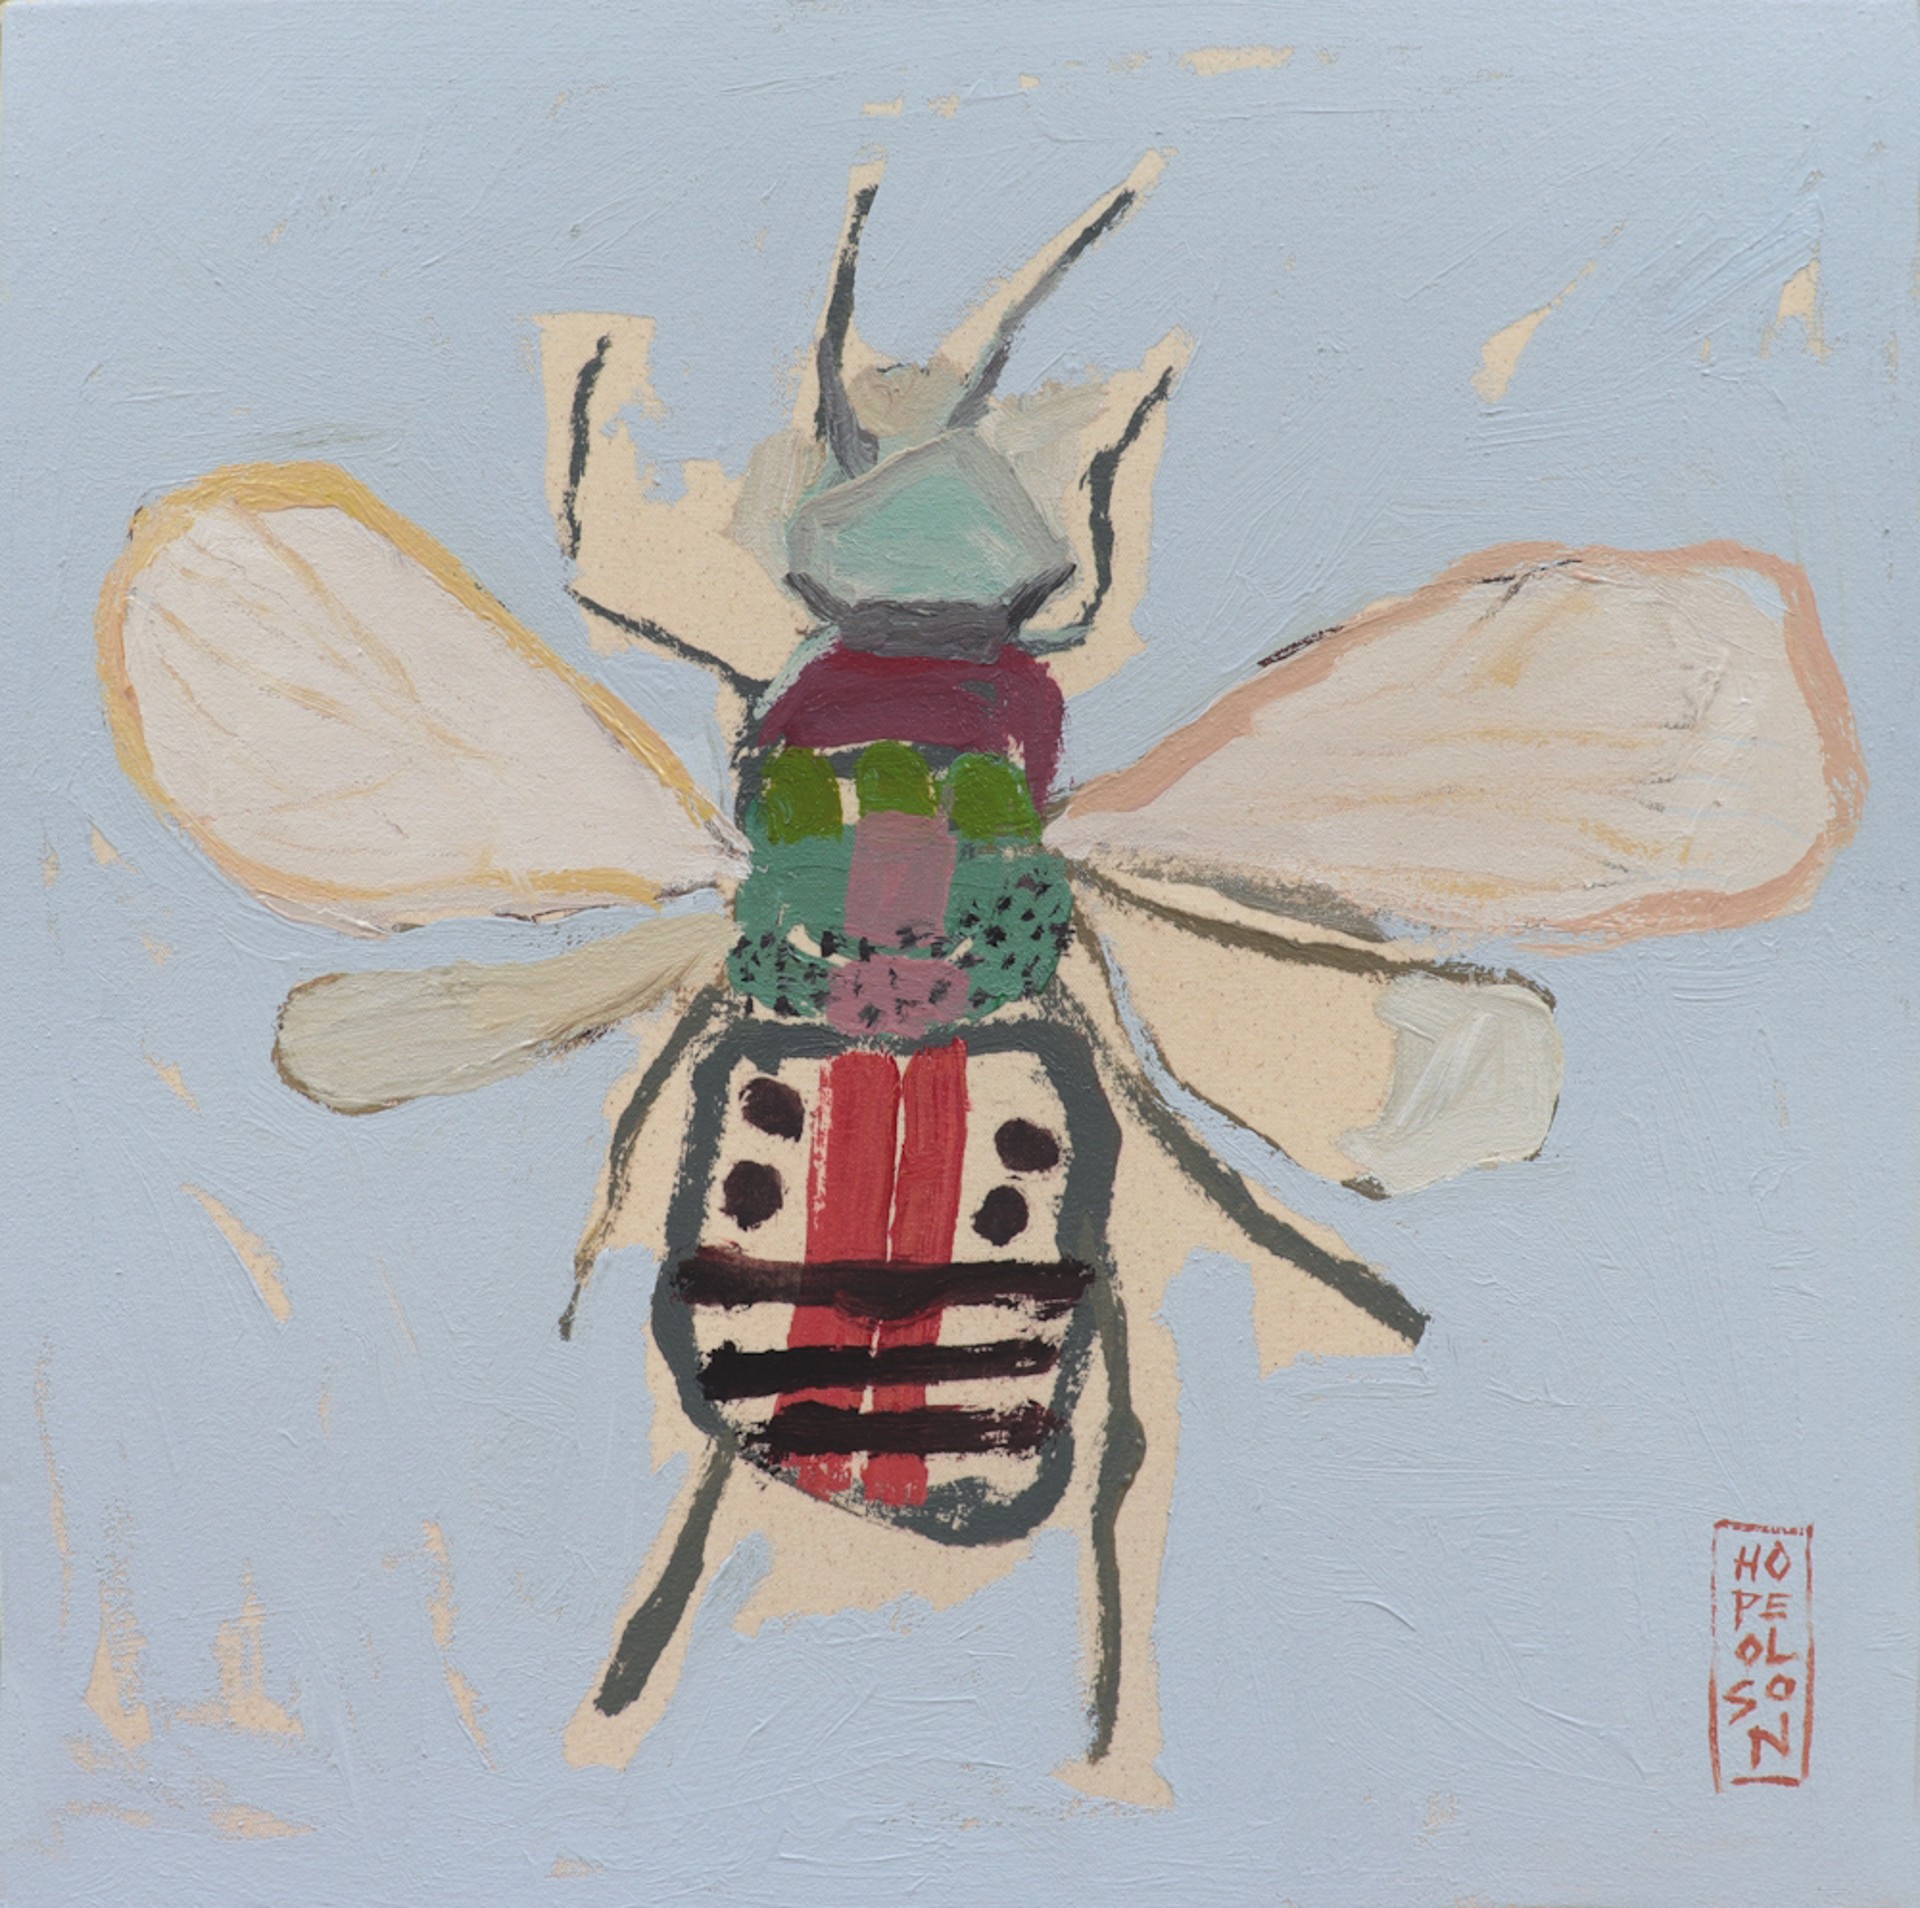 Buzz Buzz {SOLD} by Hope Olson